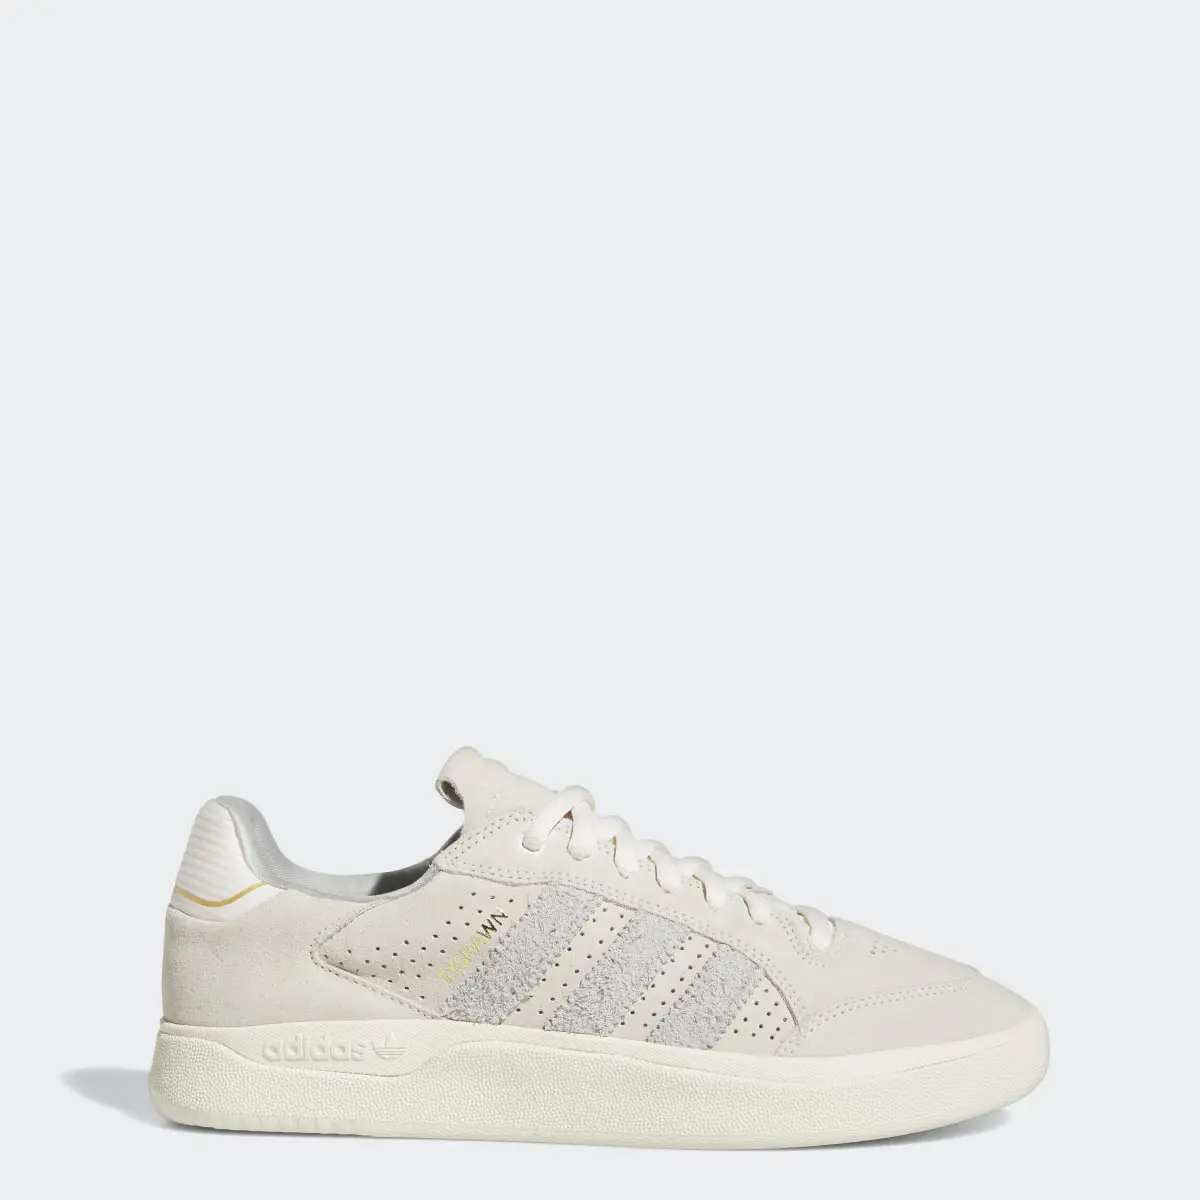 Adidas Tyshawn Low Shoes. 1